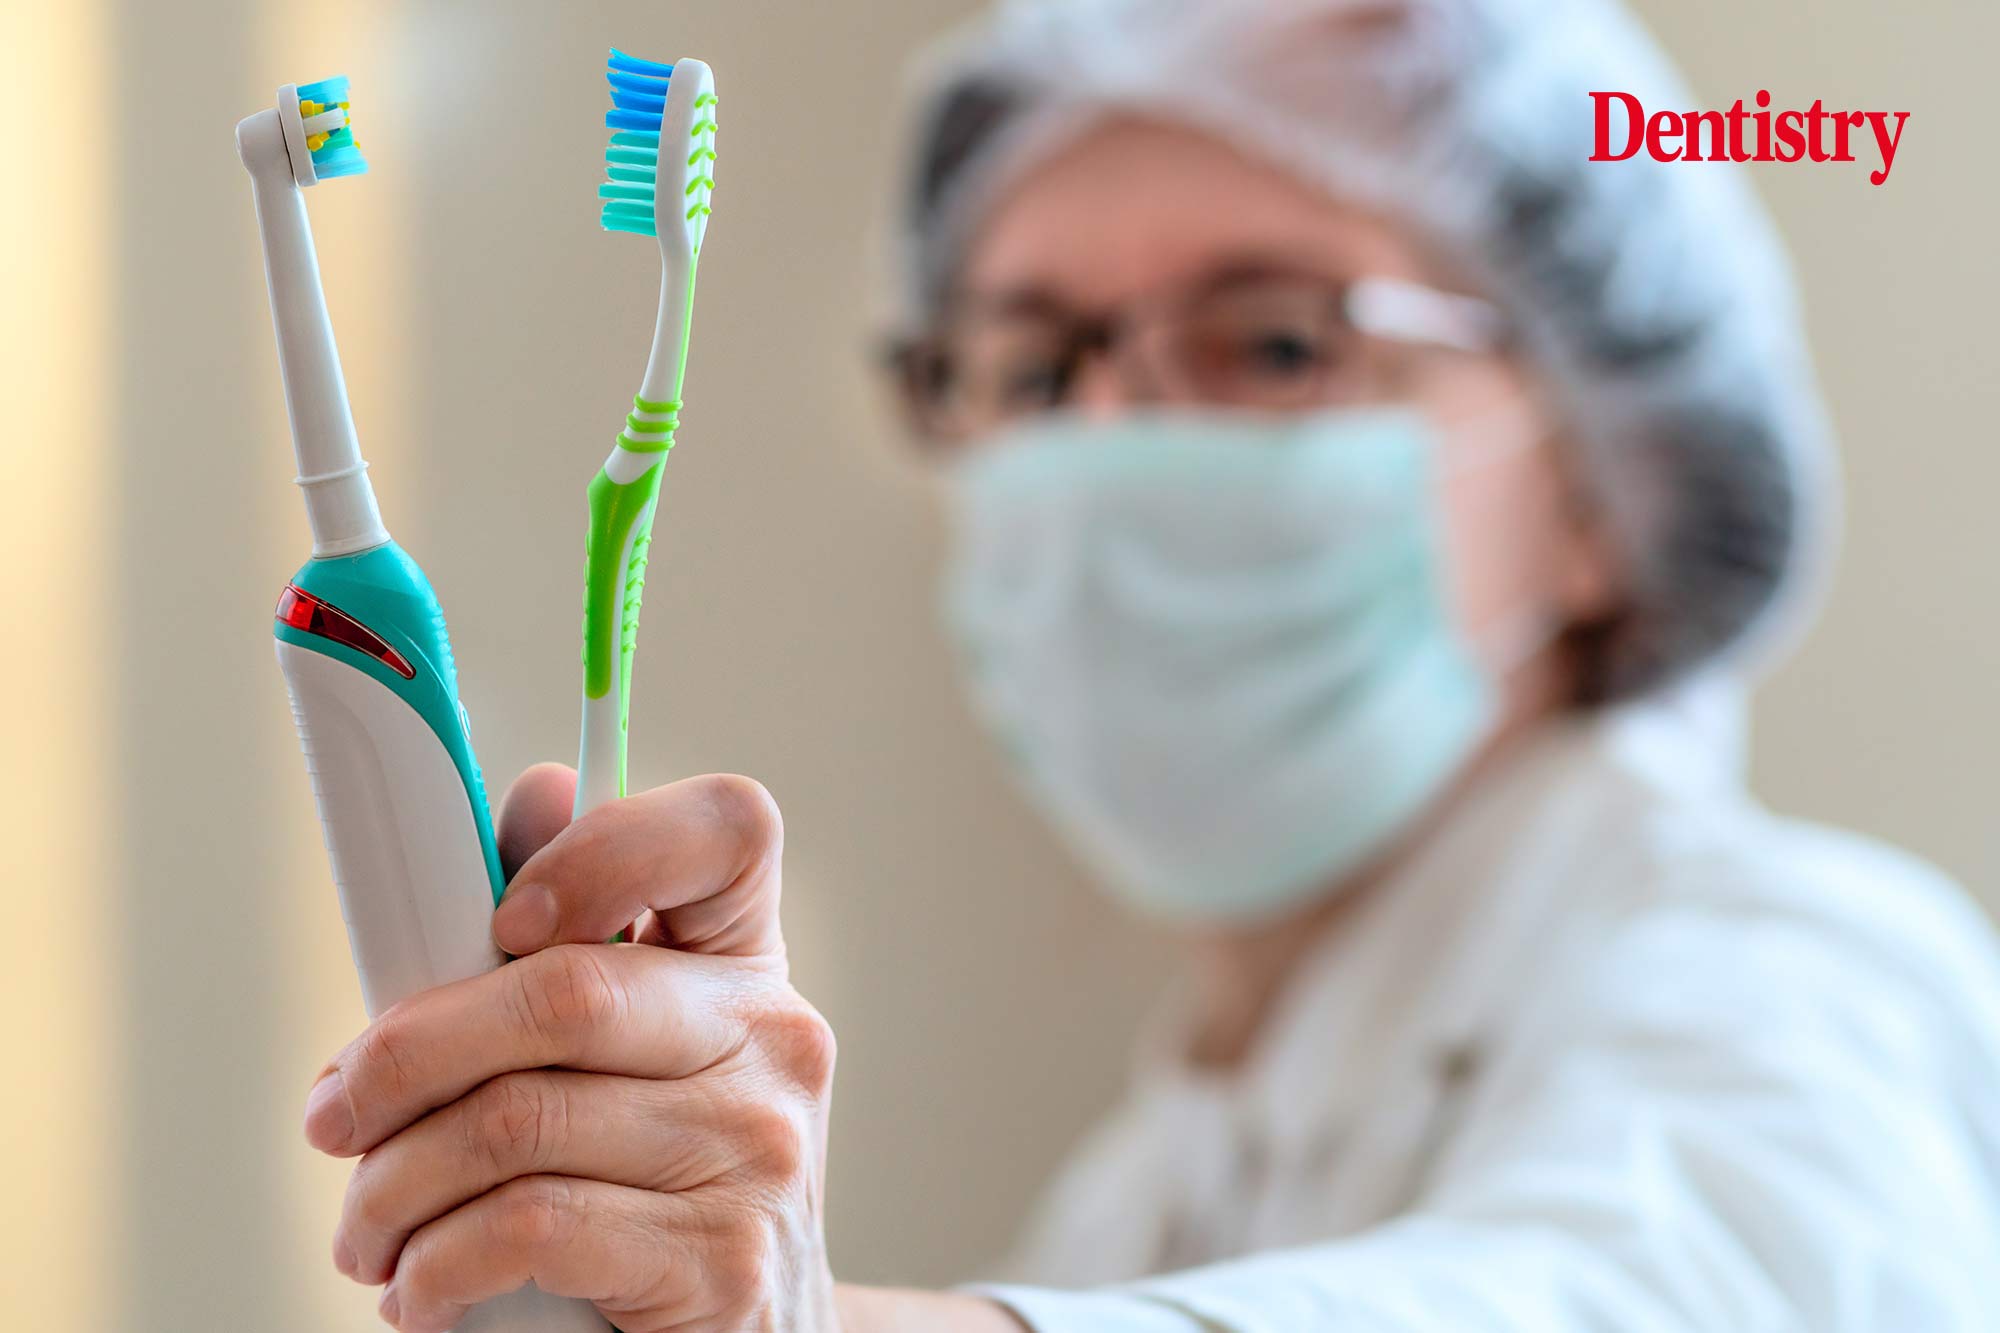 Toothbrushing linked to lower rates of pneumonia in hospitalised patients